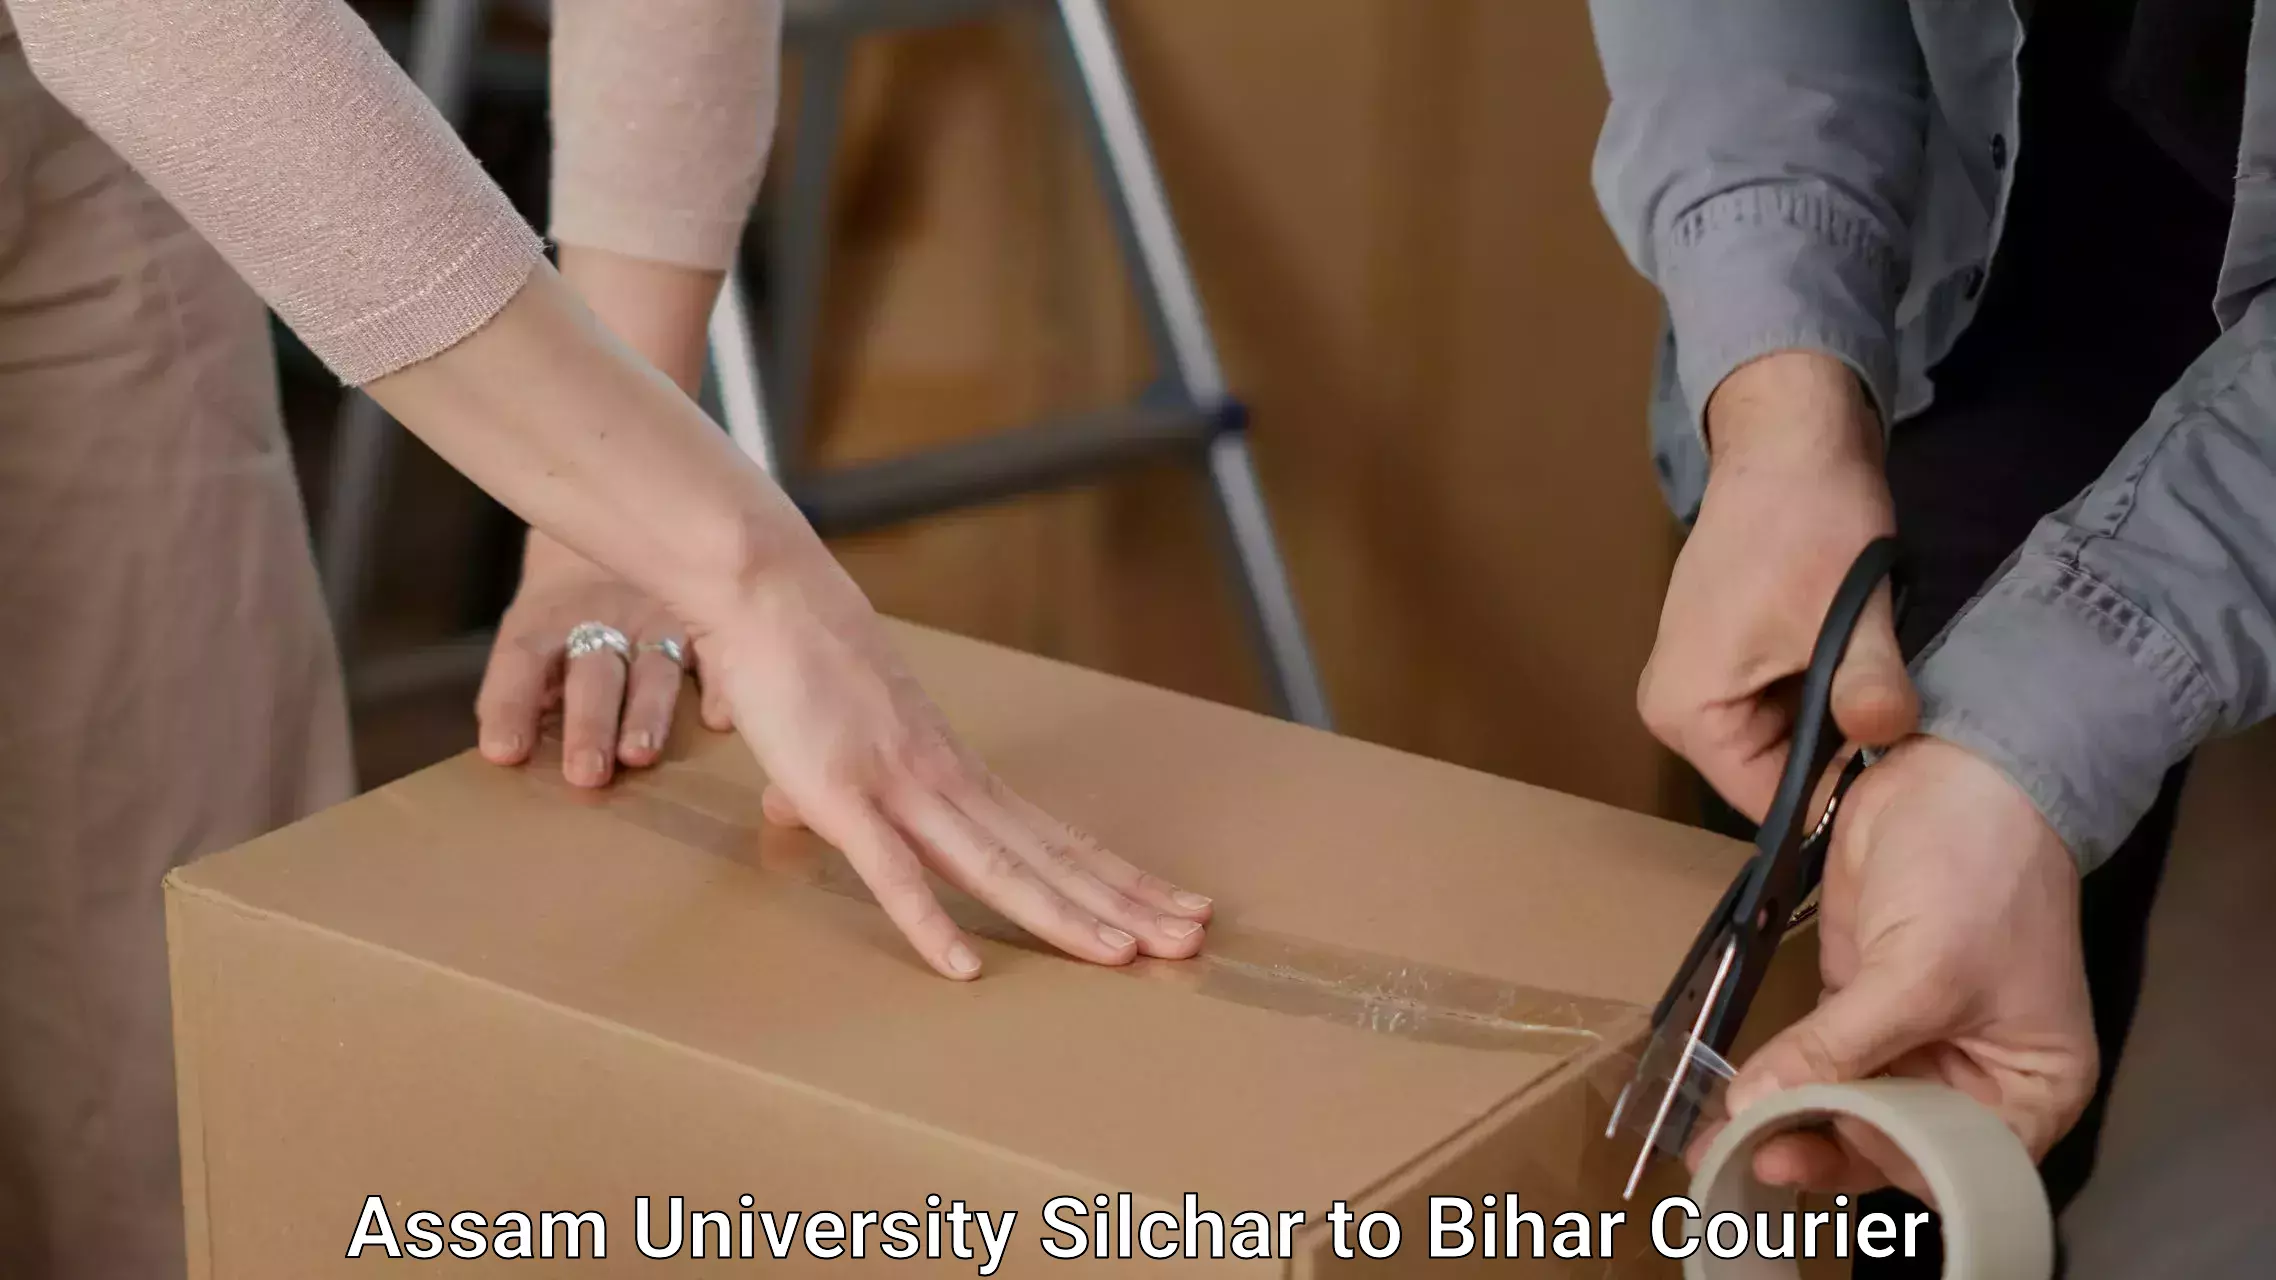 Efficient packing services Assam University Silchar to Darbhanga